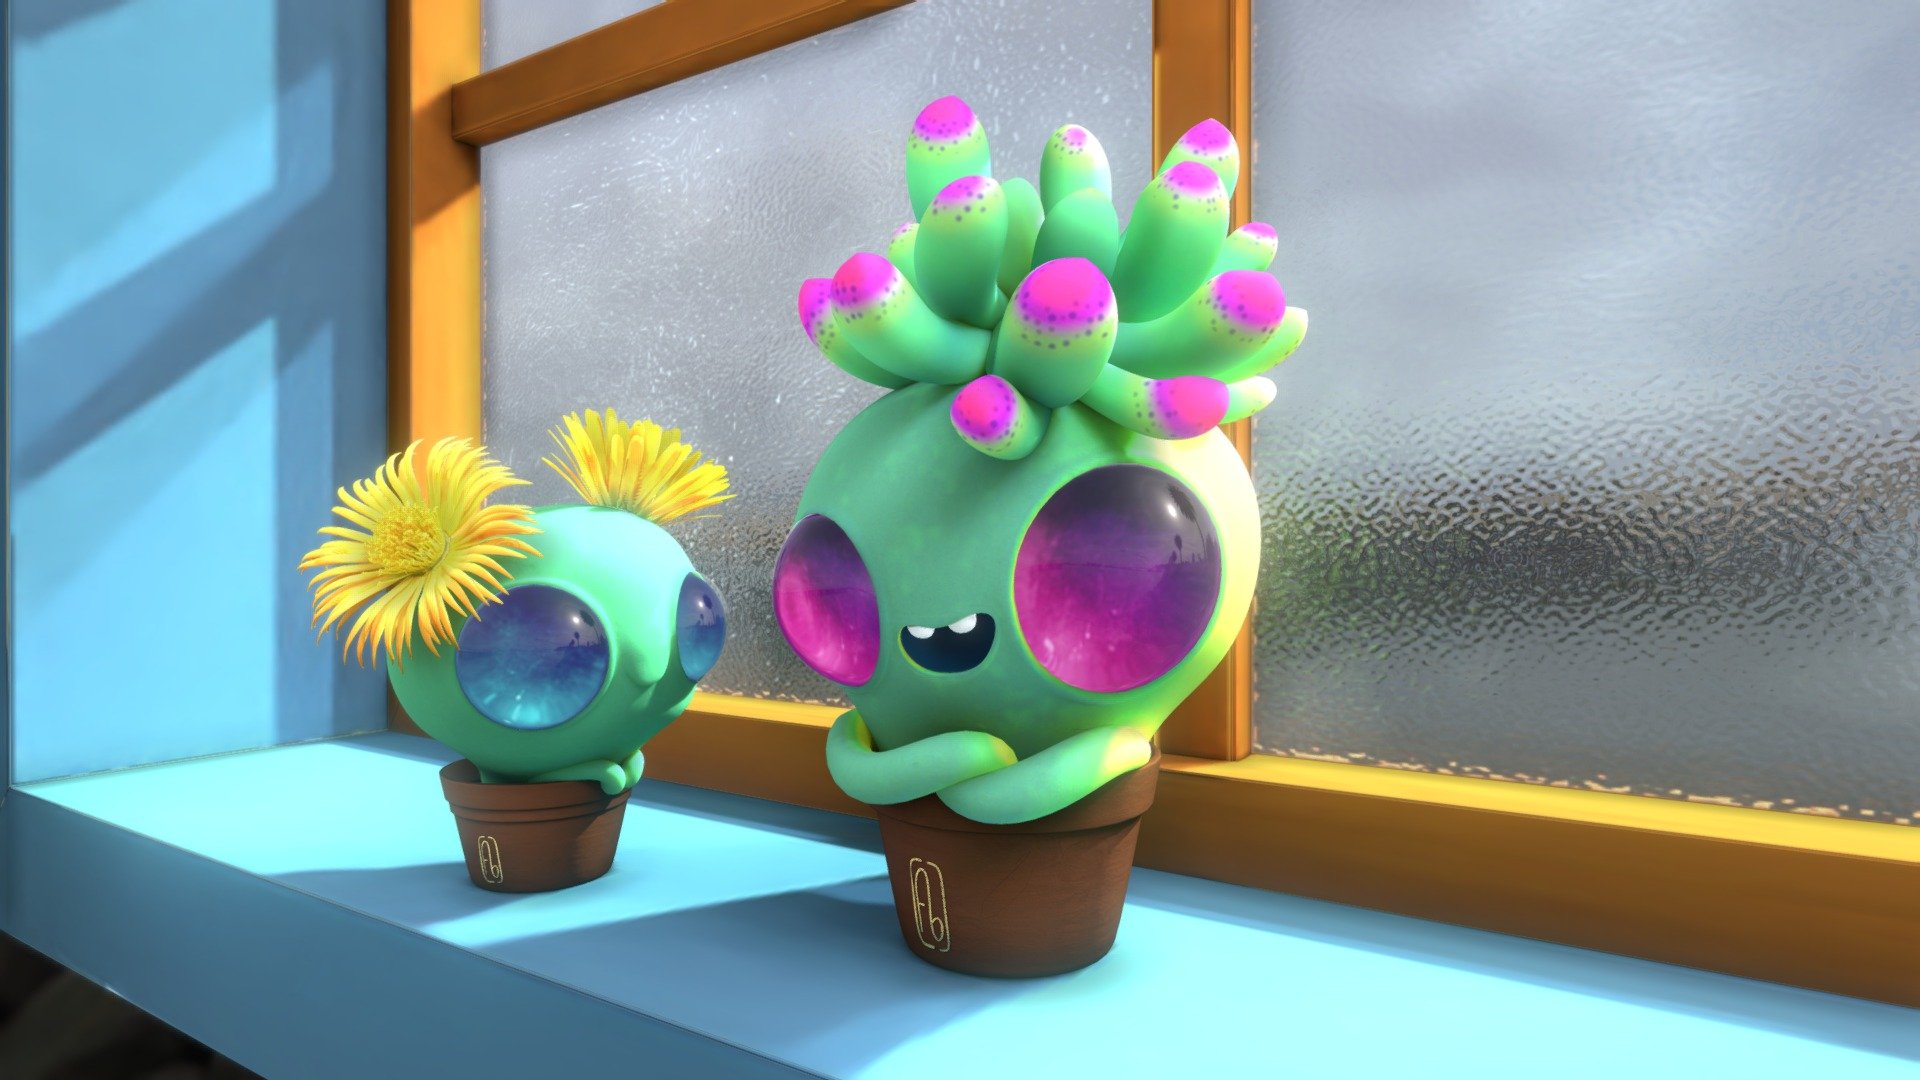 Two flowers in the window, one is a lithops and the other is a succulent.
3D model based on a concept of Florianne Becker, a great artist.

Florianne Becker profile https://www.artstation.com/floriannebecker

Concept art used https://www.artstation.com/artwork/g2Agr8 - Florianne Becker Flowers - Download Free 3D model by PixelAudaz 3d model